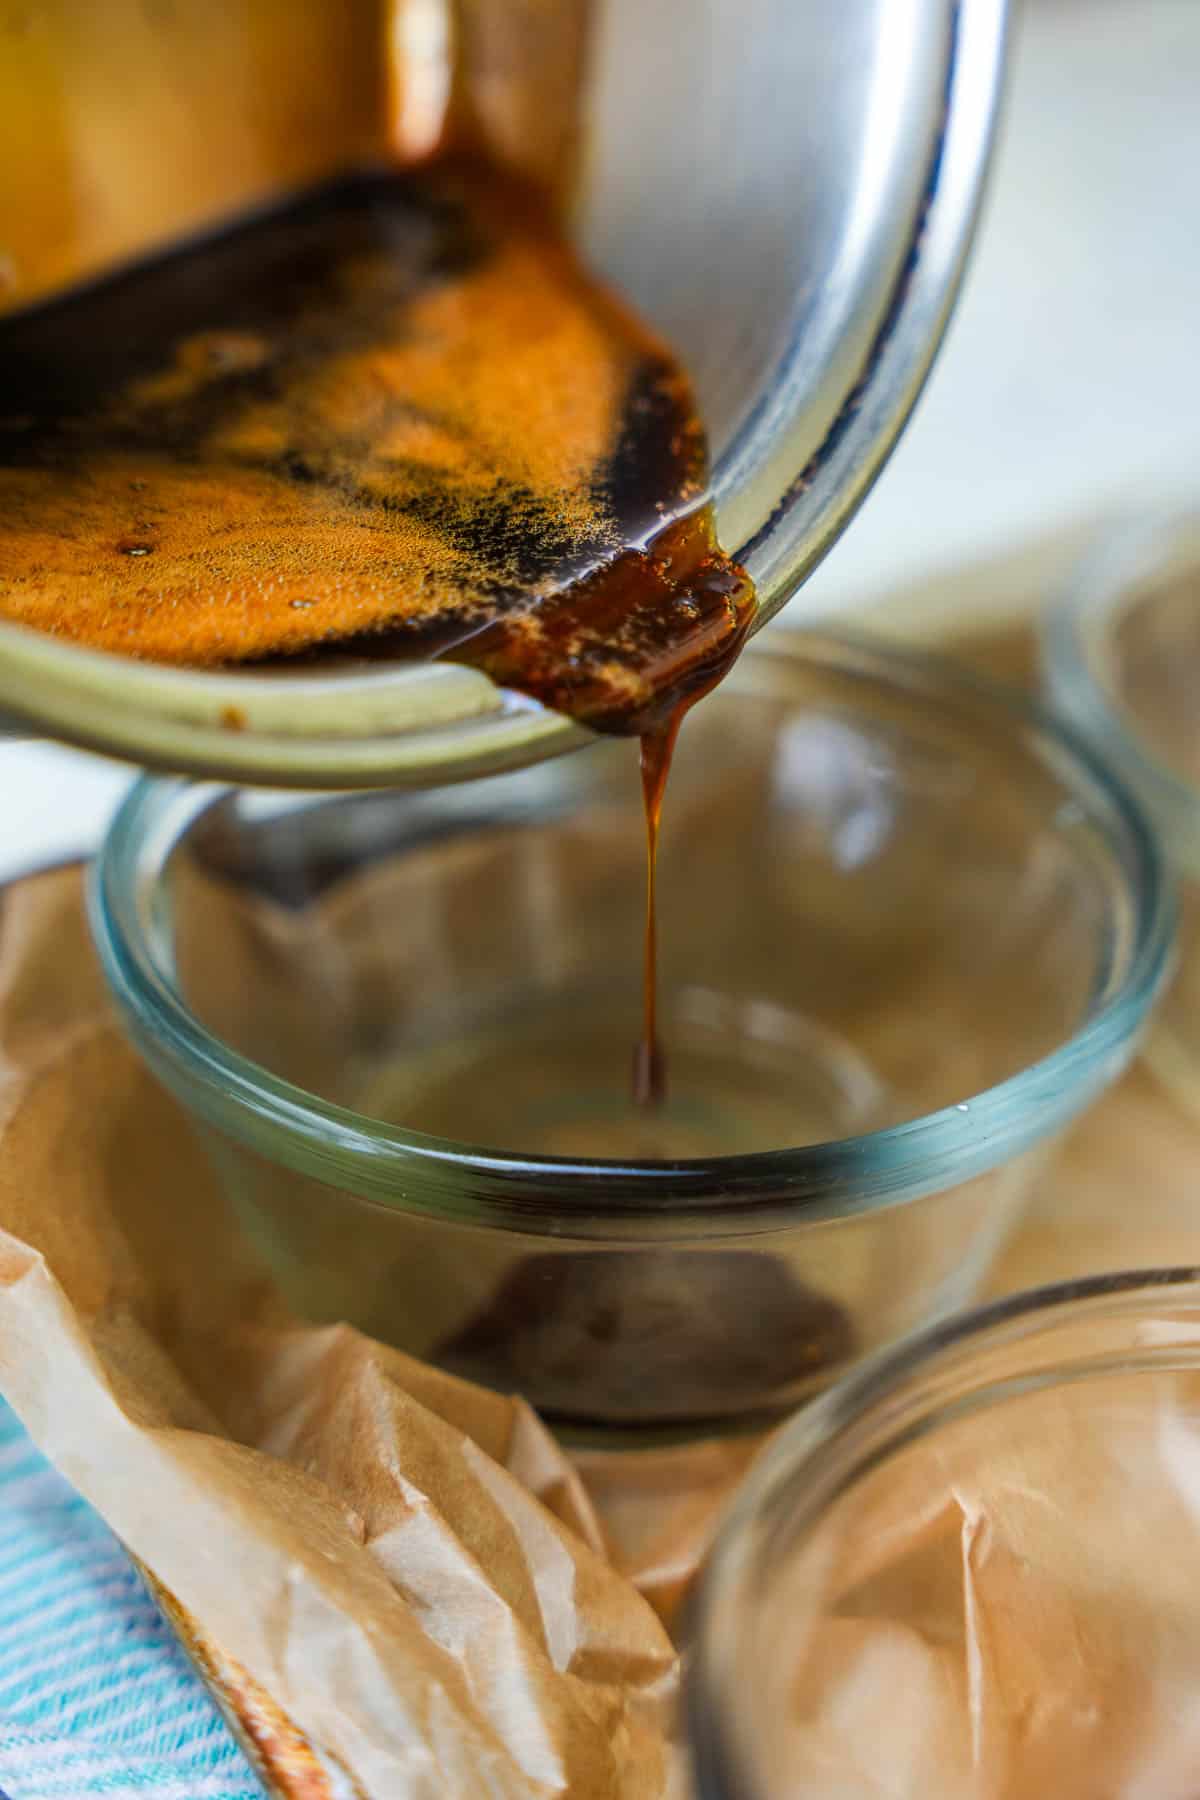 Caramel syrup is poured into glass ramekins on a parchment paper lined baking tray.